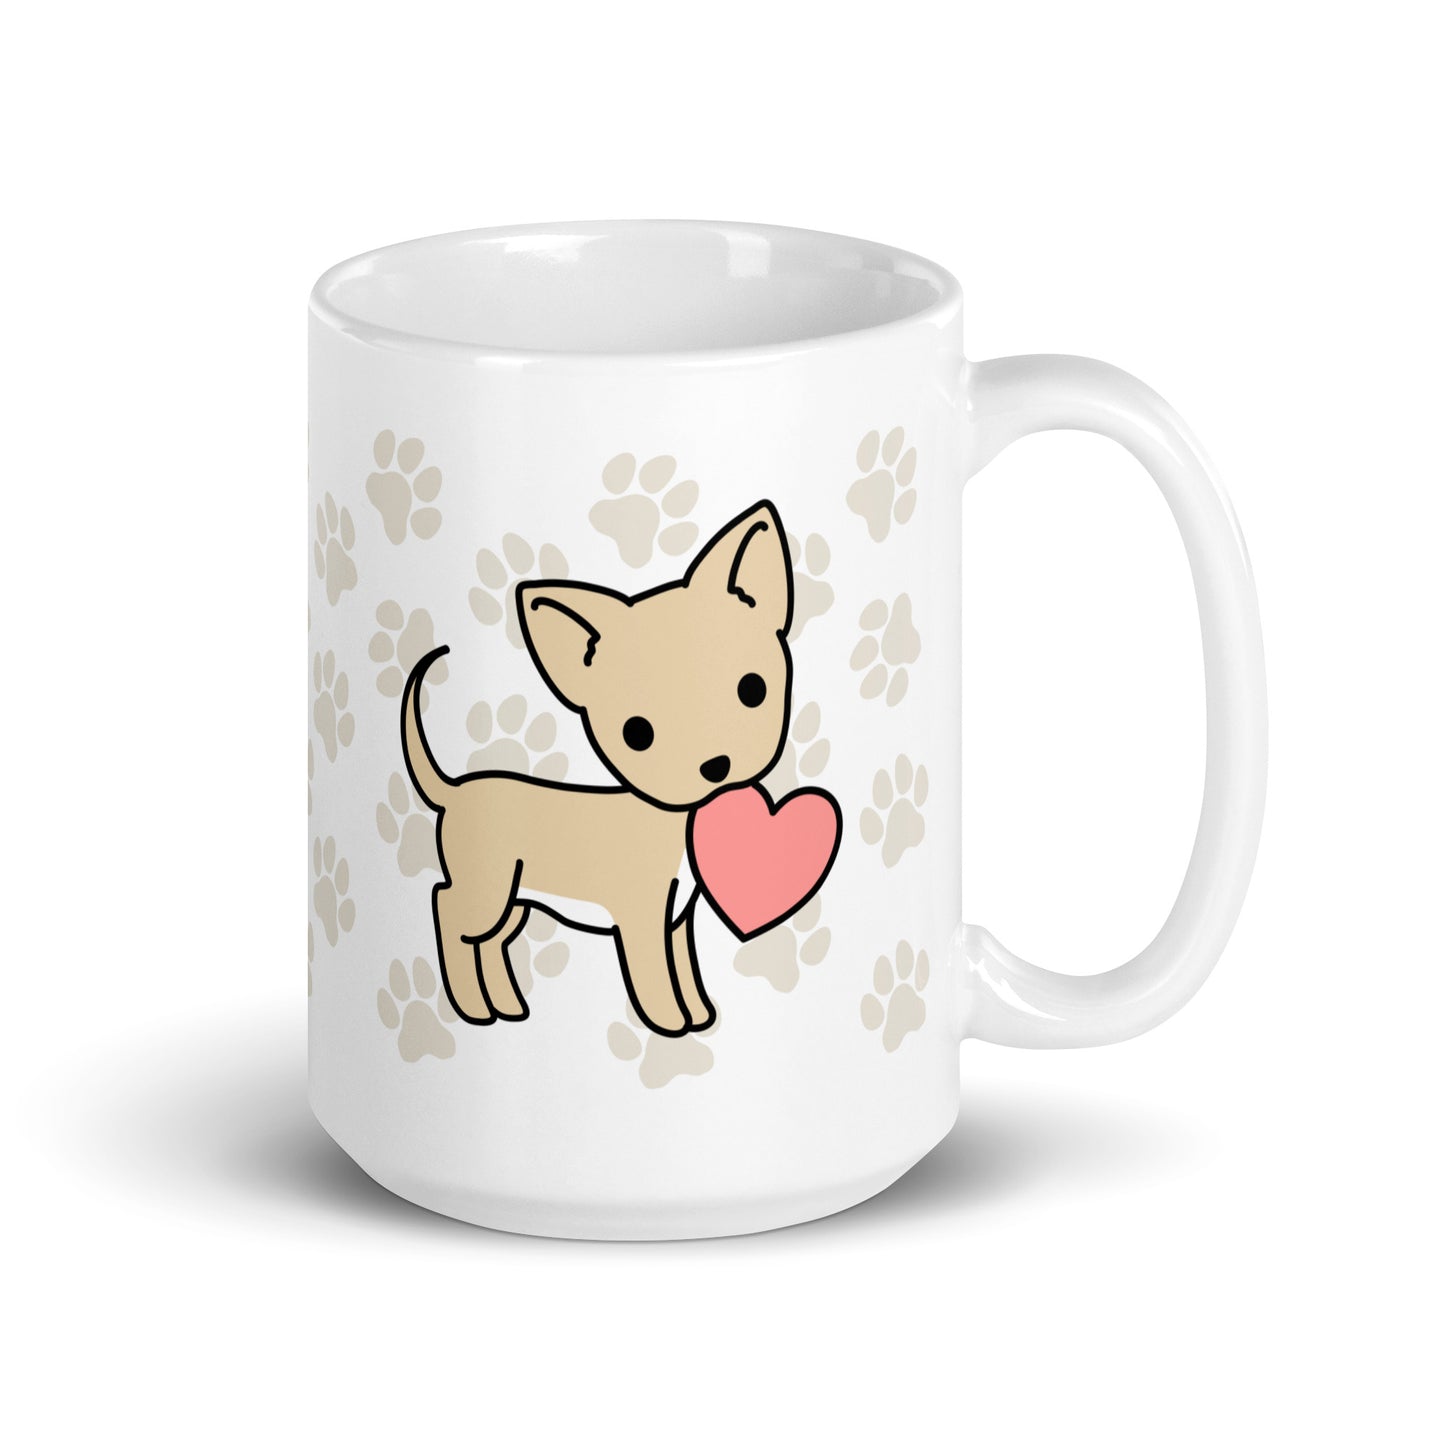 A white 15 ounce ceramic mug with a pattern of light brown pawprints all over. The mug also features a stylized illustration of a Chihuahua holding a heart in its mouth.